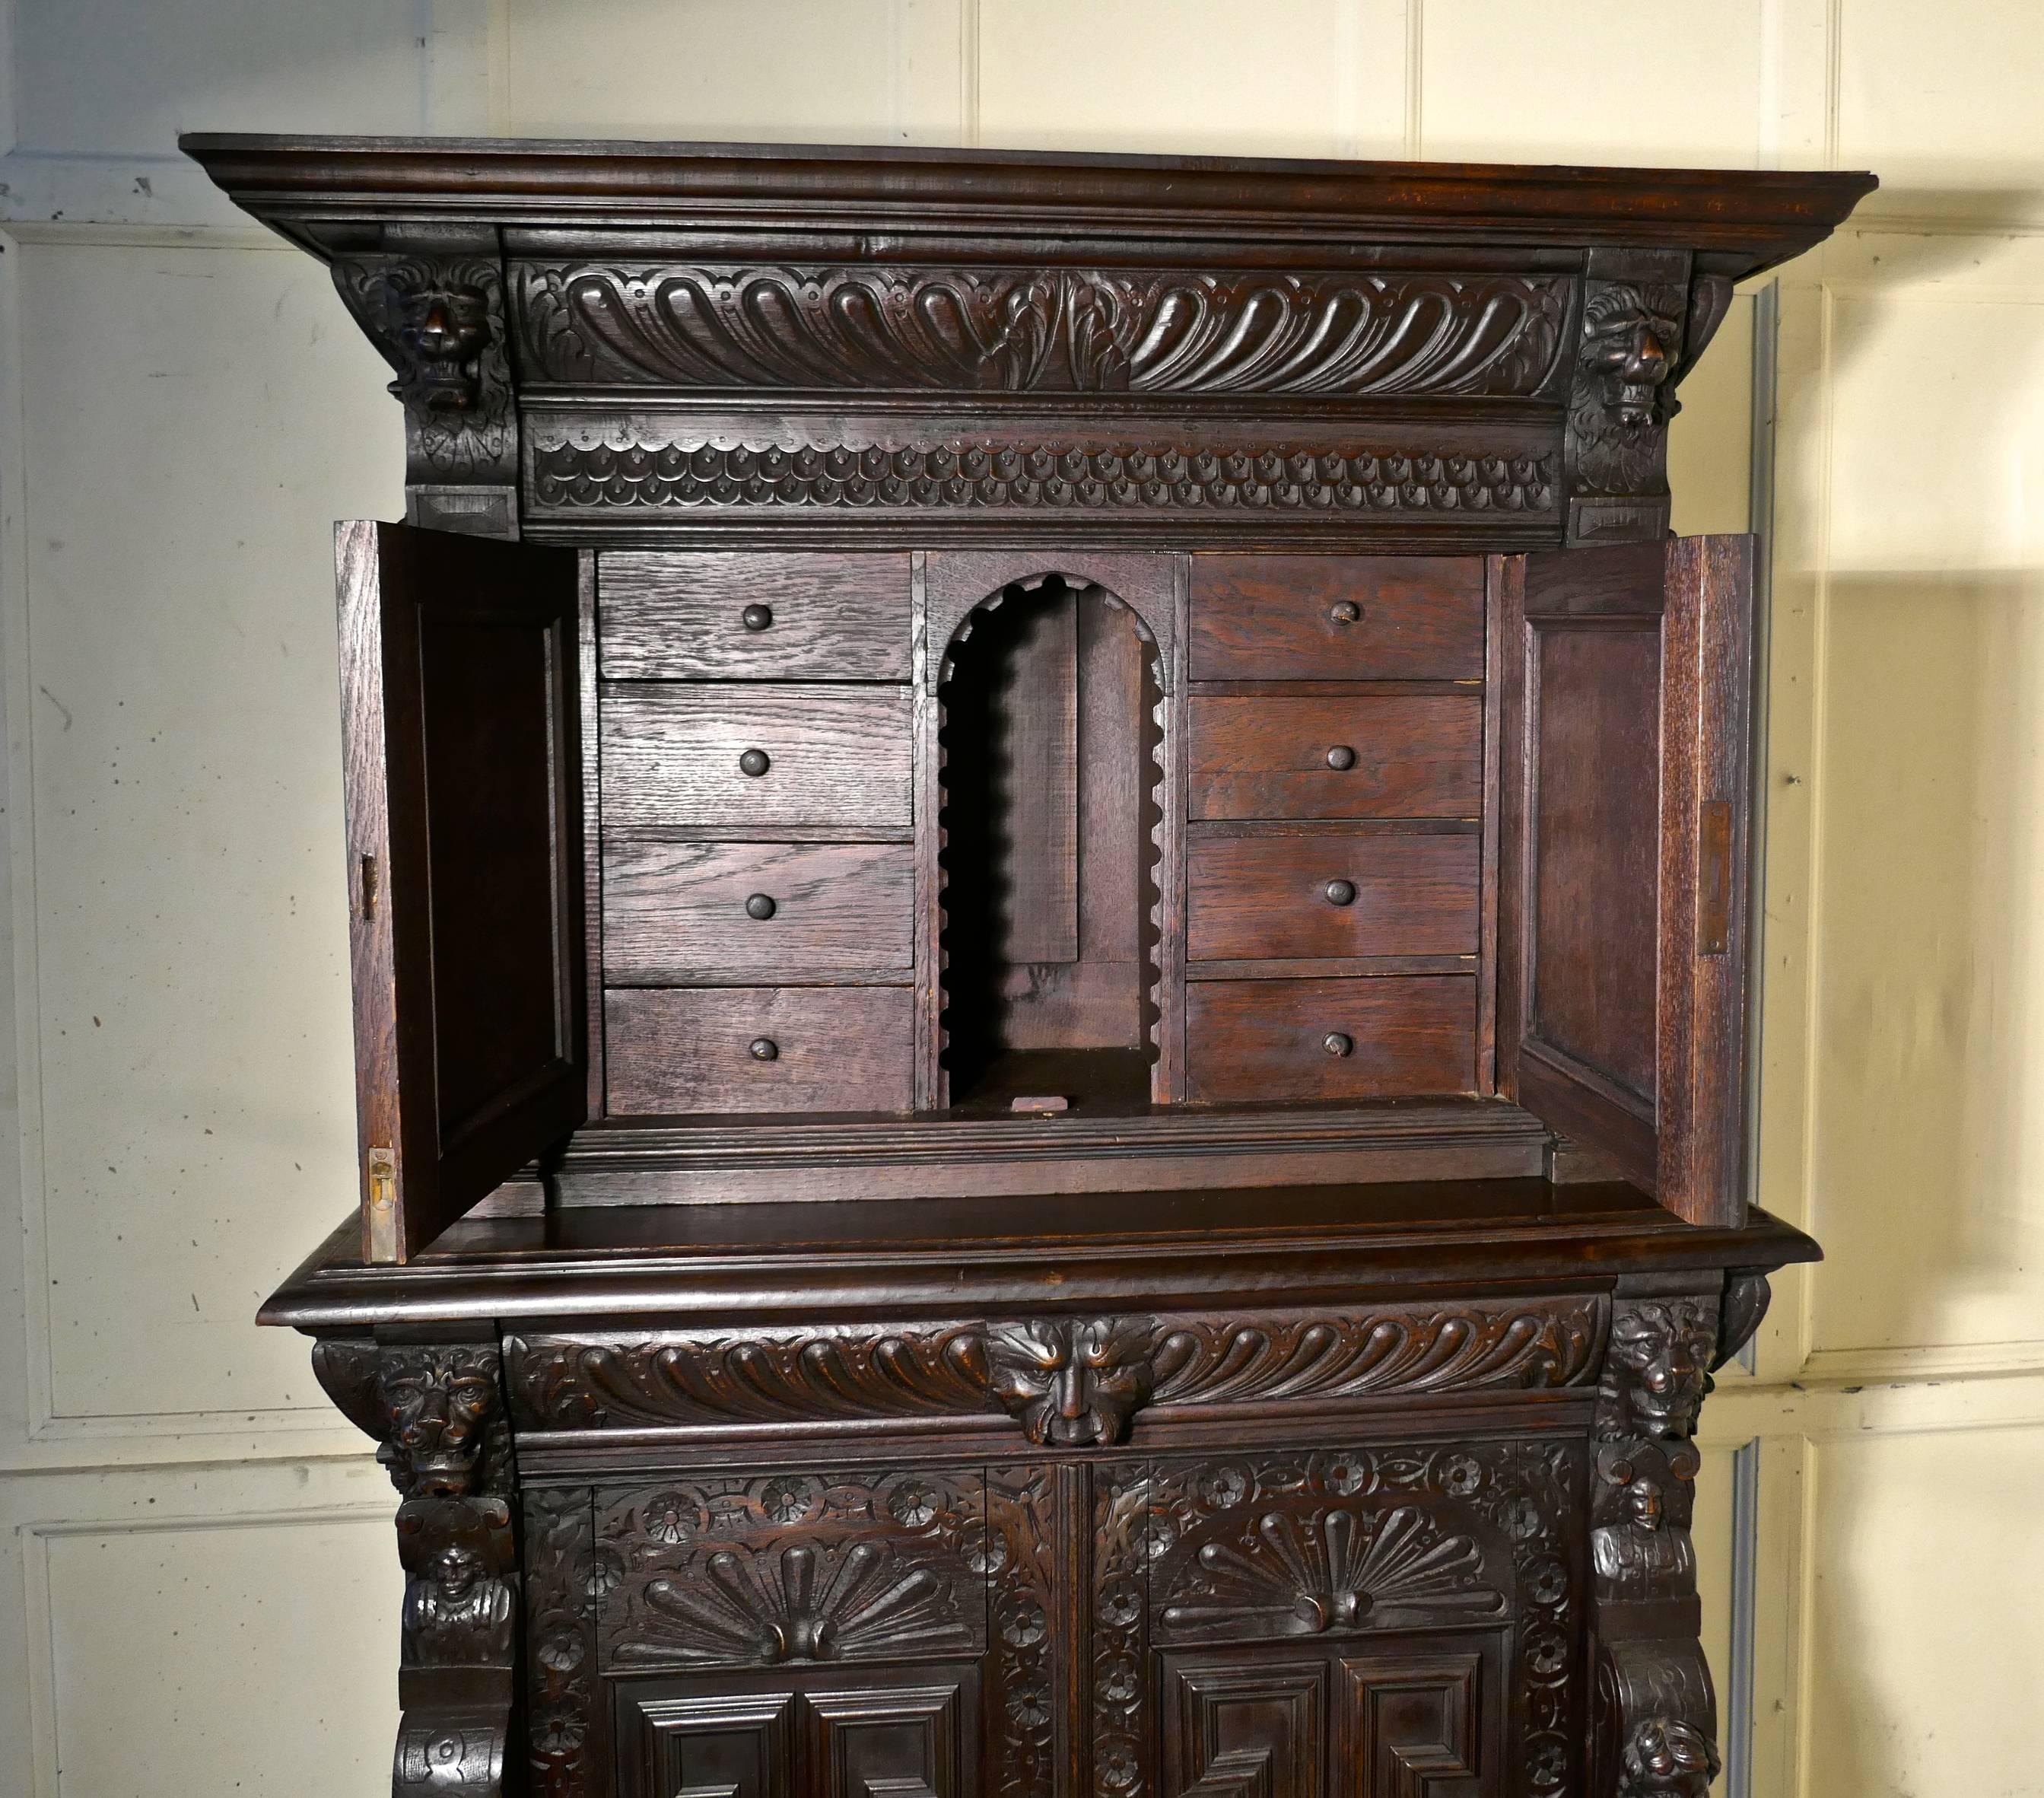 19th century carved oak housekeepers or hall cupboard.
 
This is a lovely antique cupboard, it is in two parts, the upper part has a carved cornice and a pair of doors enclosing a ledger pigeon hole with four drawers on either side
The lower